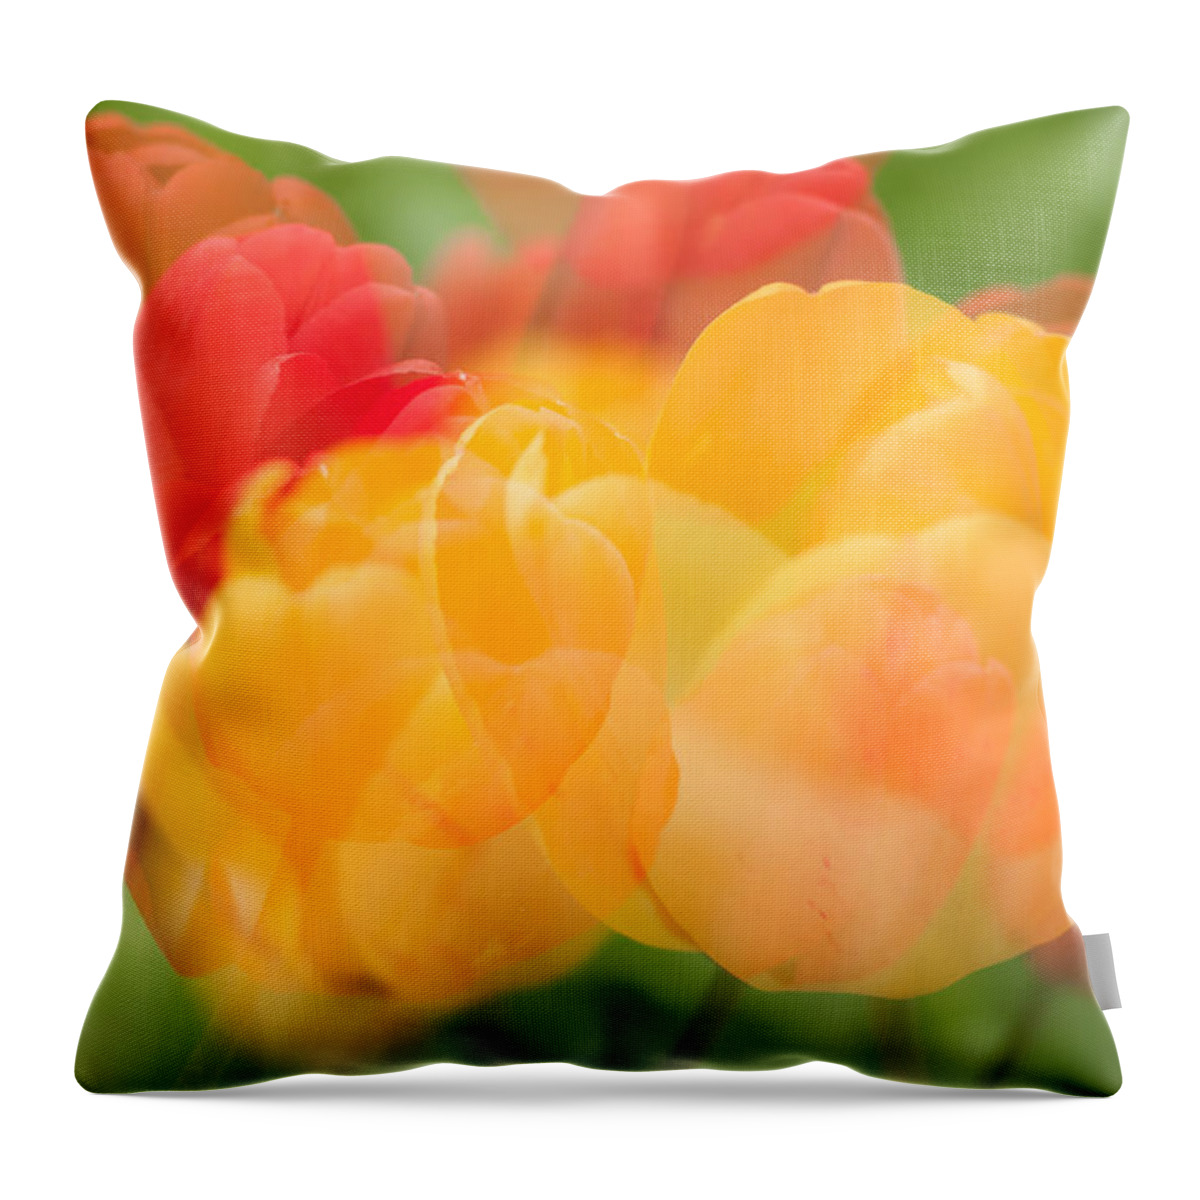 Abstract Throw Pillow featuring the photograph Summer Feeling by Marcus Karlsson Sall